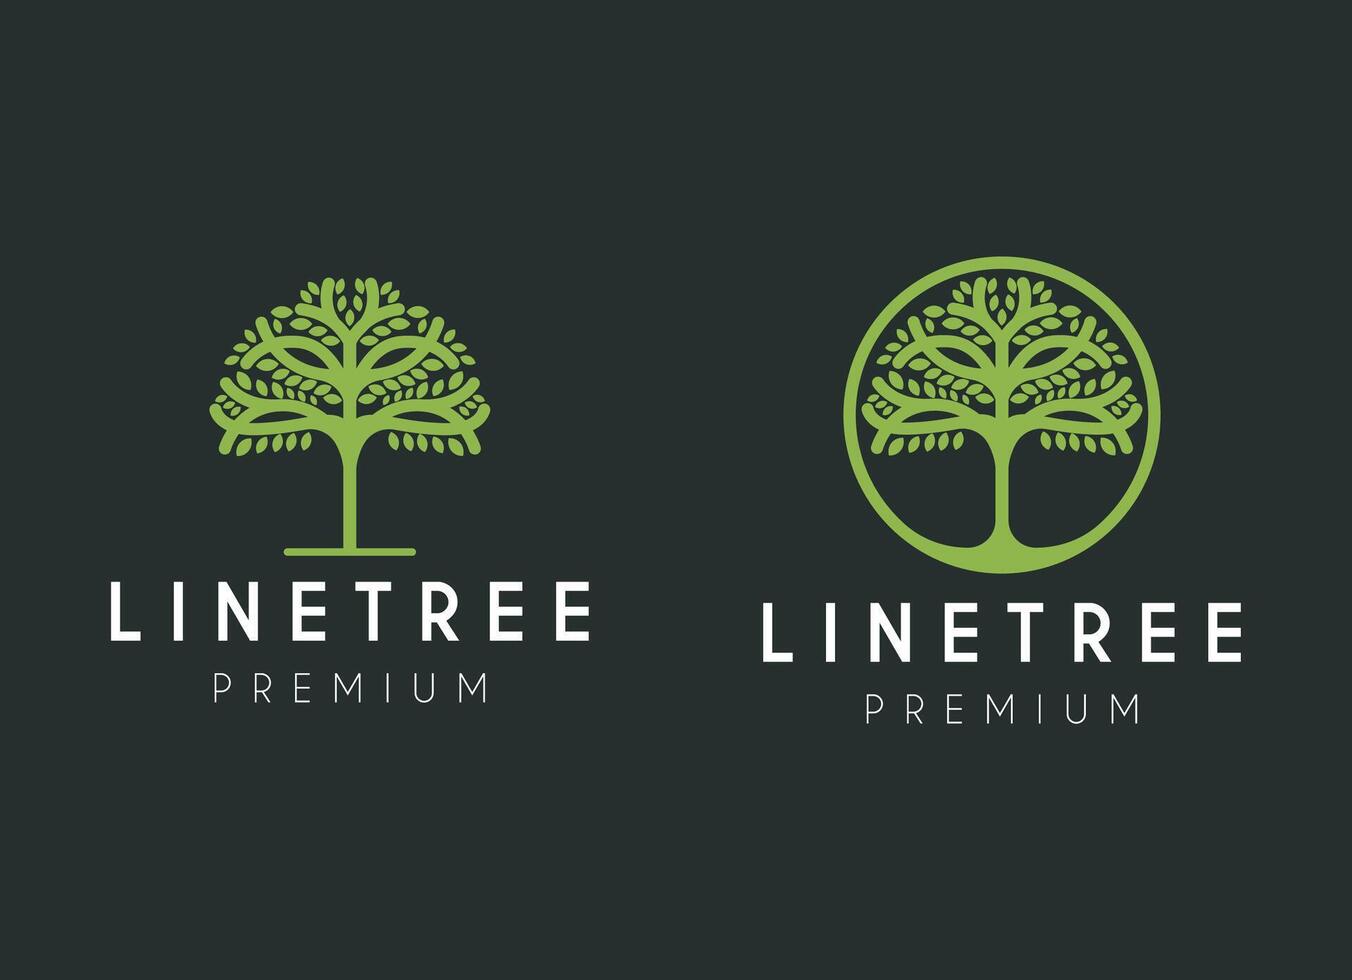 Organic Tree nature symbols. Tree branch with leaves signs. Natural plant design elements emblems. Vector illustration.